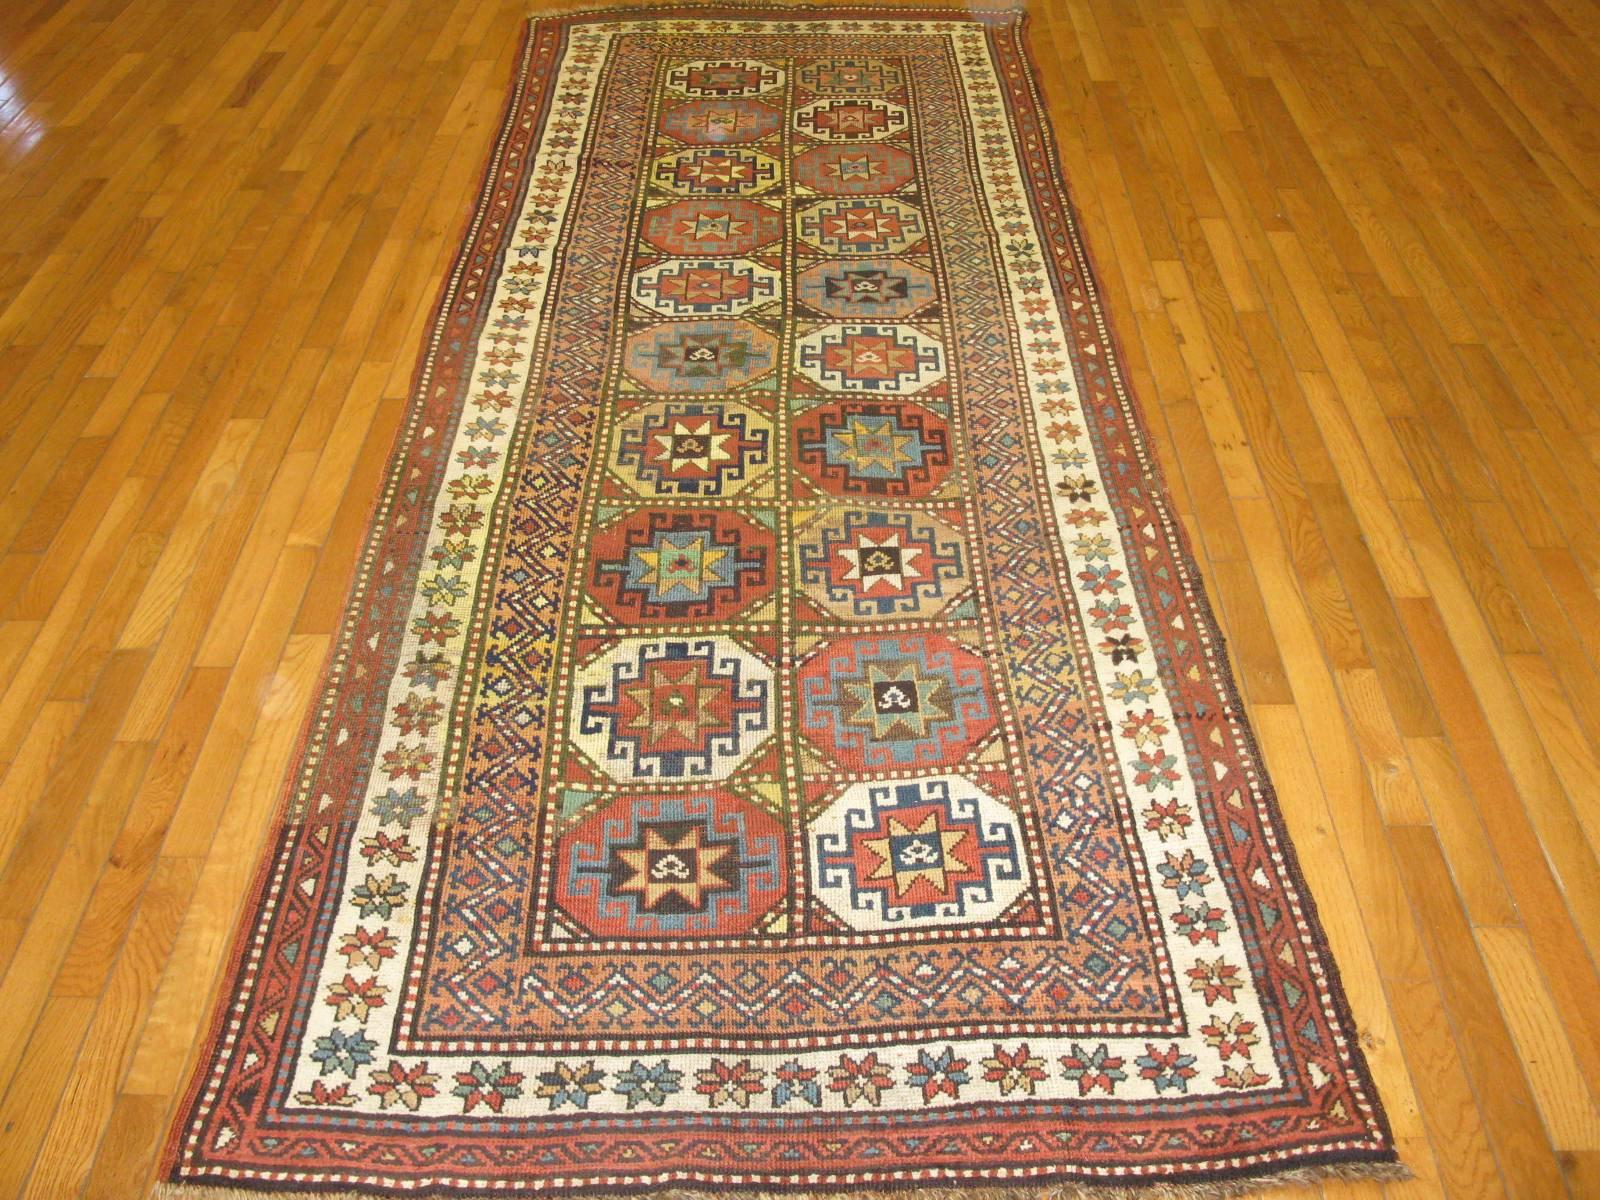 This is a beautiful antique hand-knotted Caucasian Kazak rug made with all wool and natural dyes. The rug has a traditional repetitive medallions geometric design. It is in great condition and measures about 3'9'' x 11'.